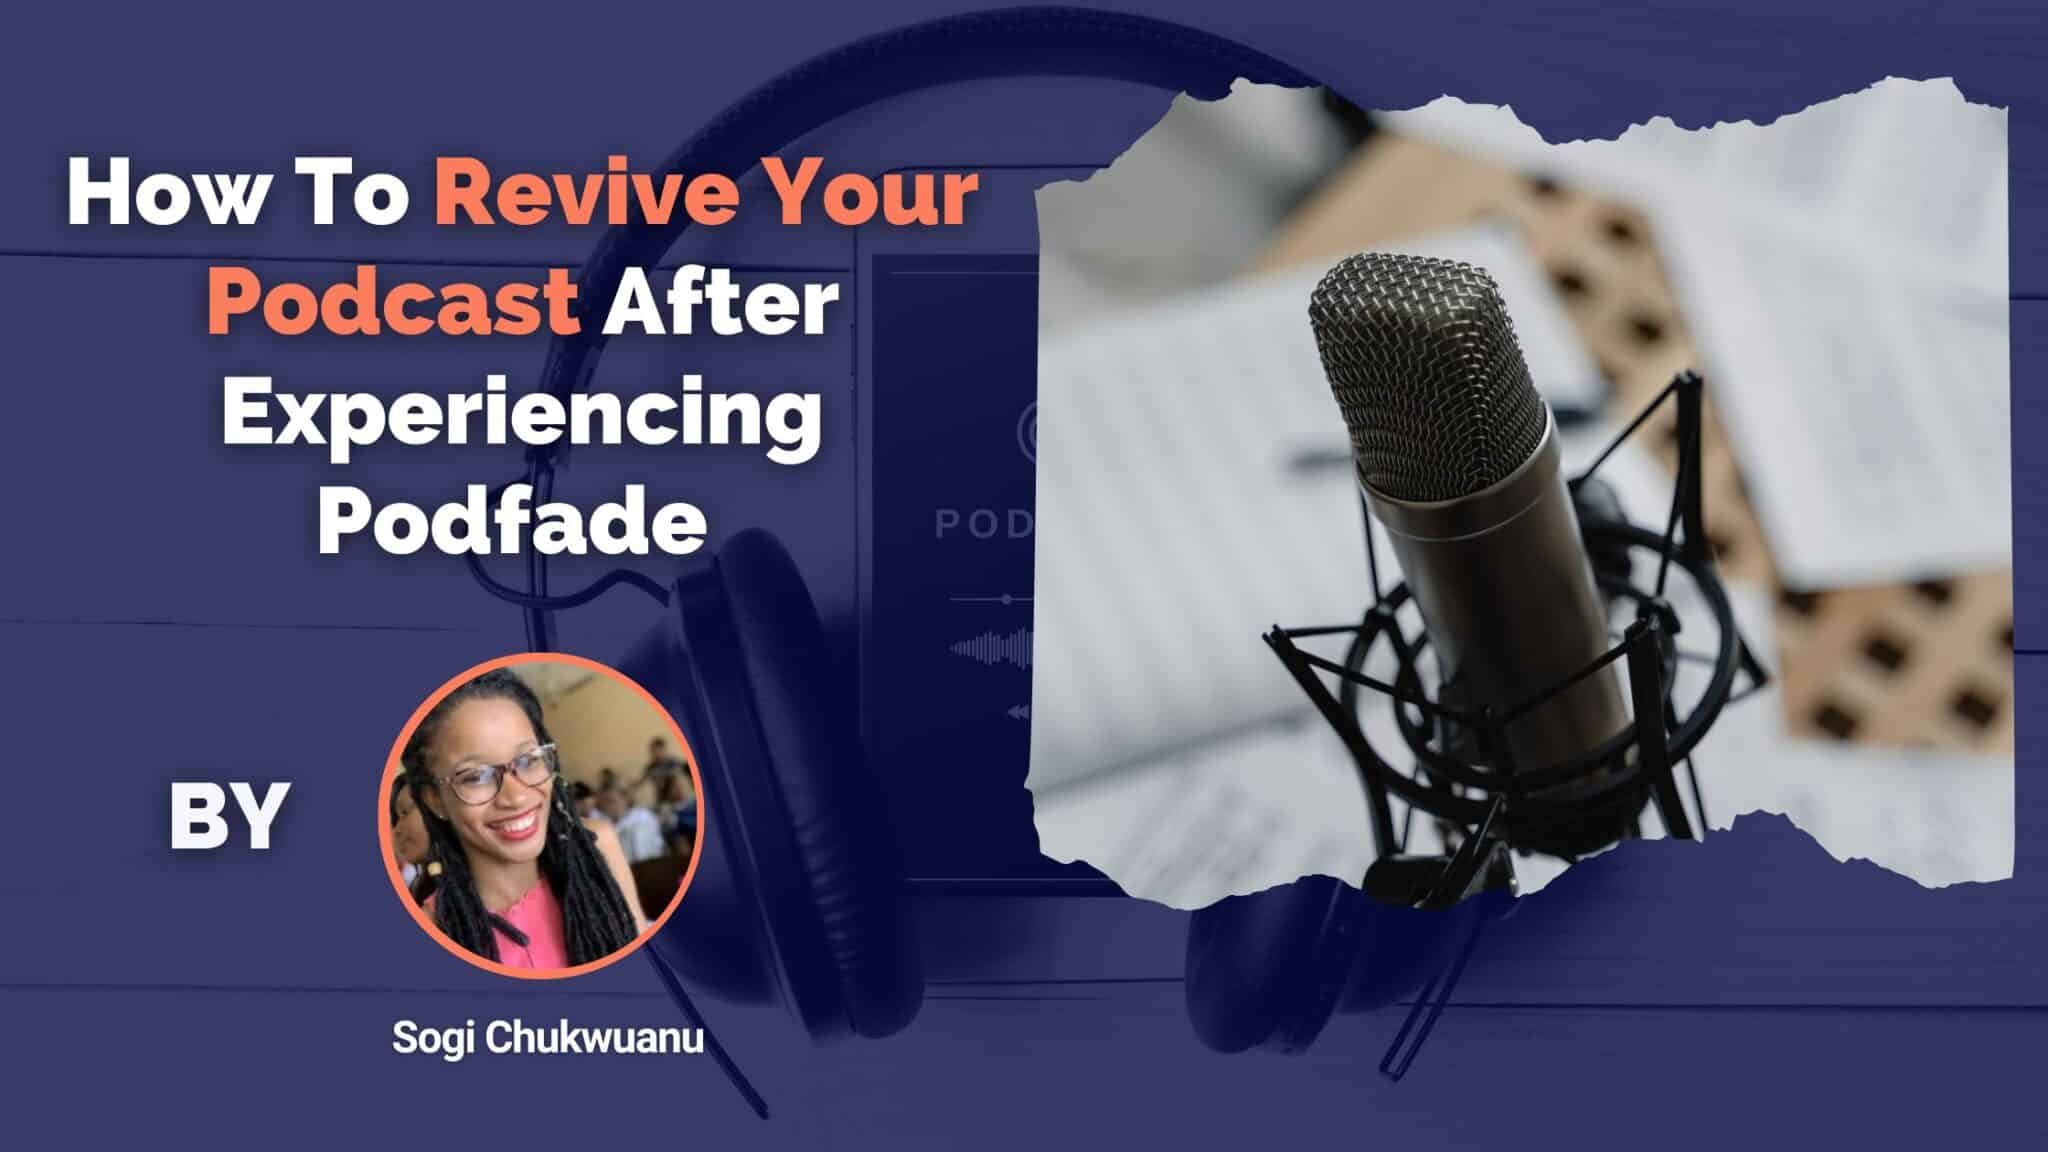 How To Revive Your Podcast After Experiencing Podfade